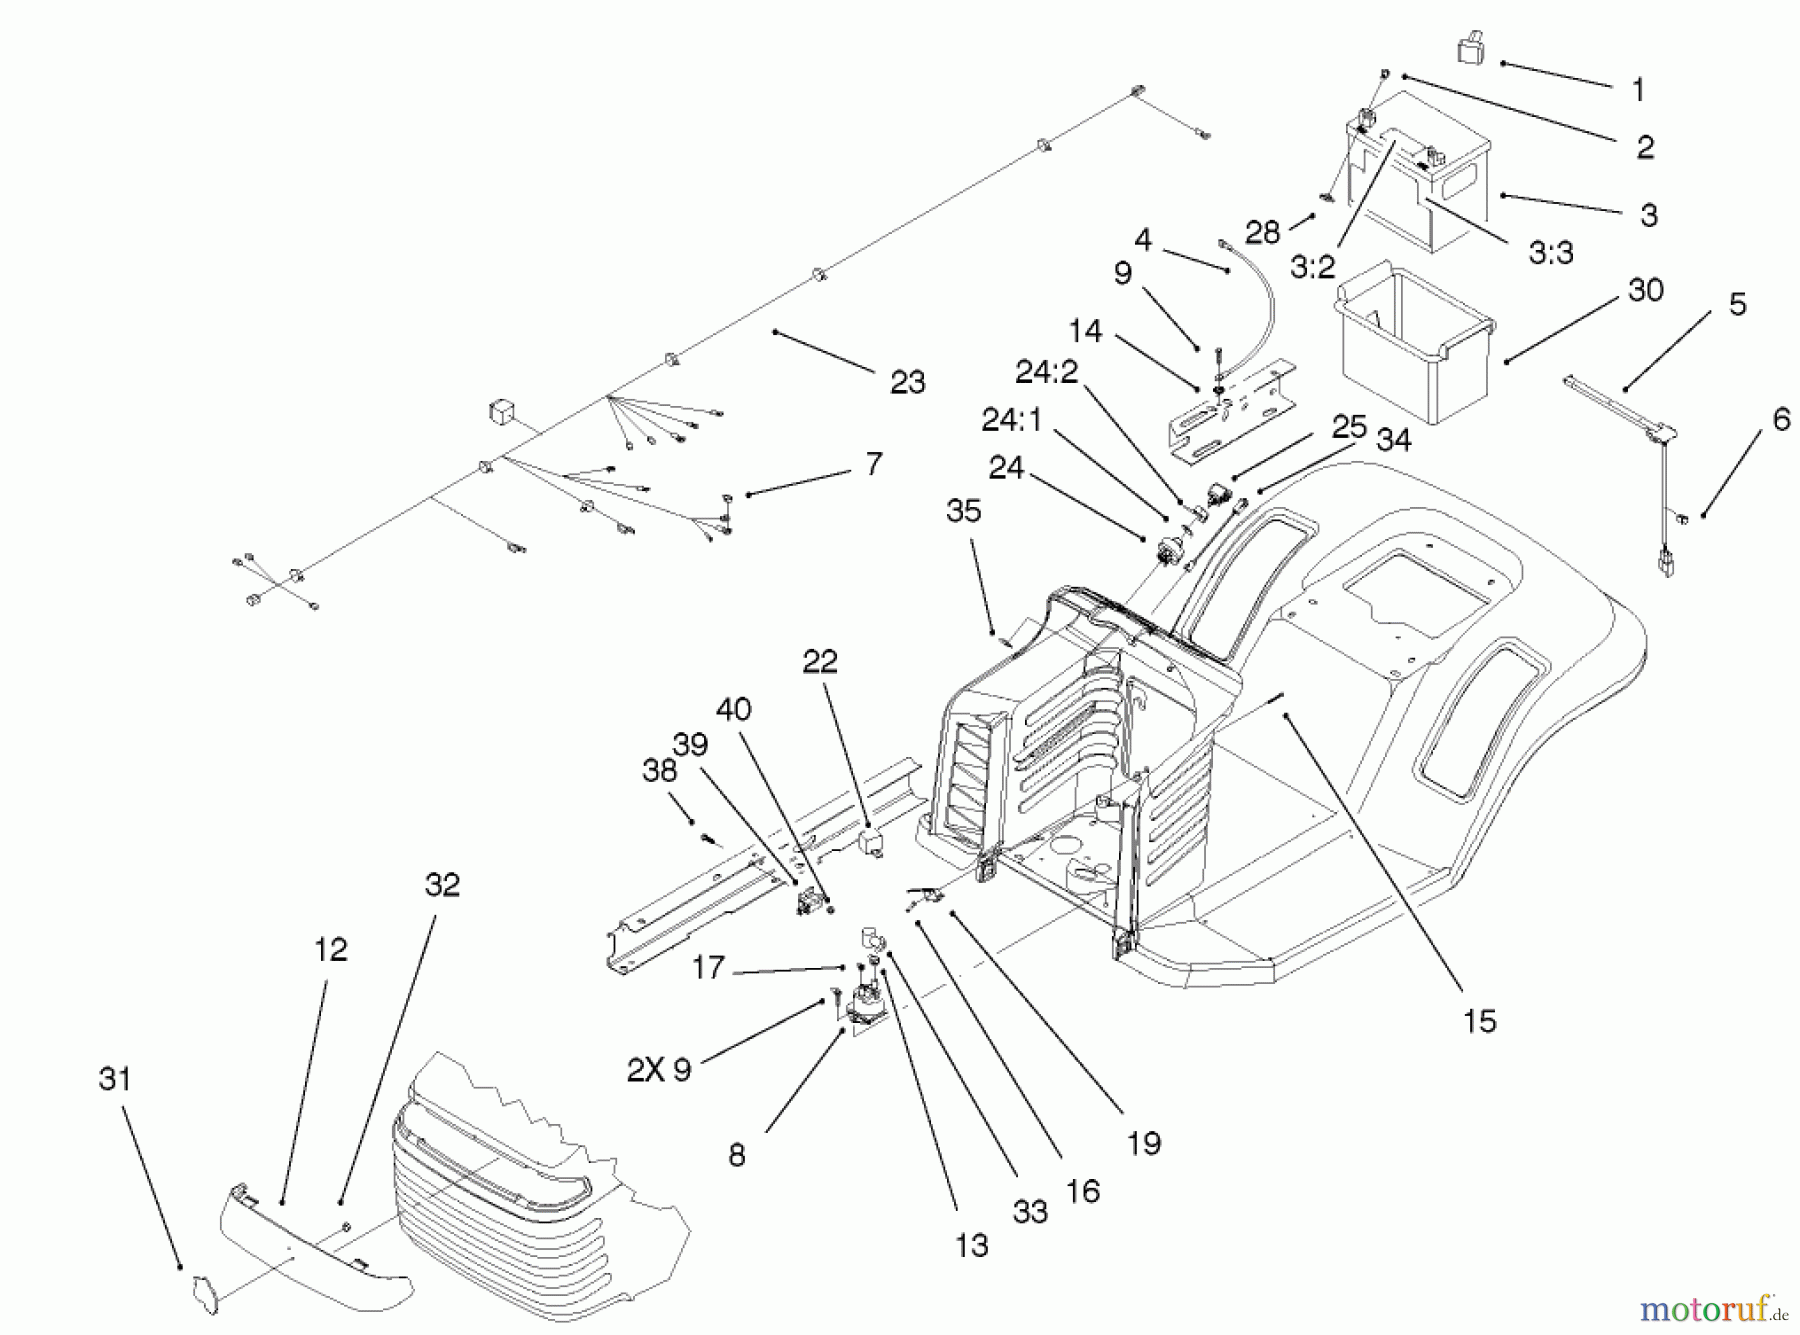  Toro Neu Mowers, Lawn & Garden Tractor Seite 1 71209 (13-32XLE) - Toro 13-32XLE Lawn Tractor, 2001 (210000001-210999999) ELECTRICAL COMPONENTS ASSEMBLY